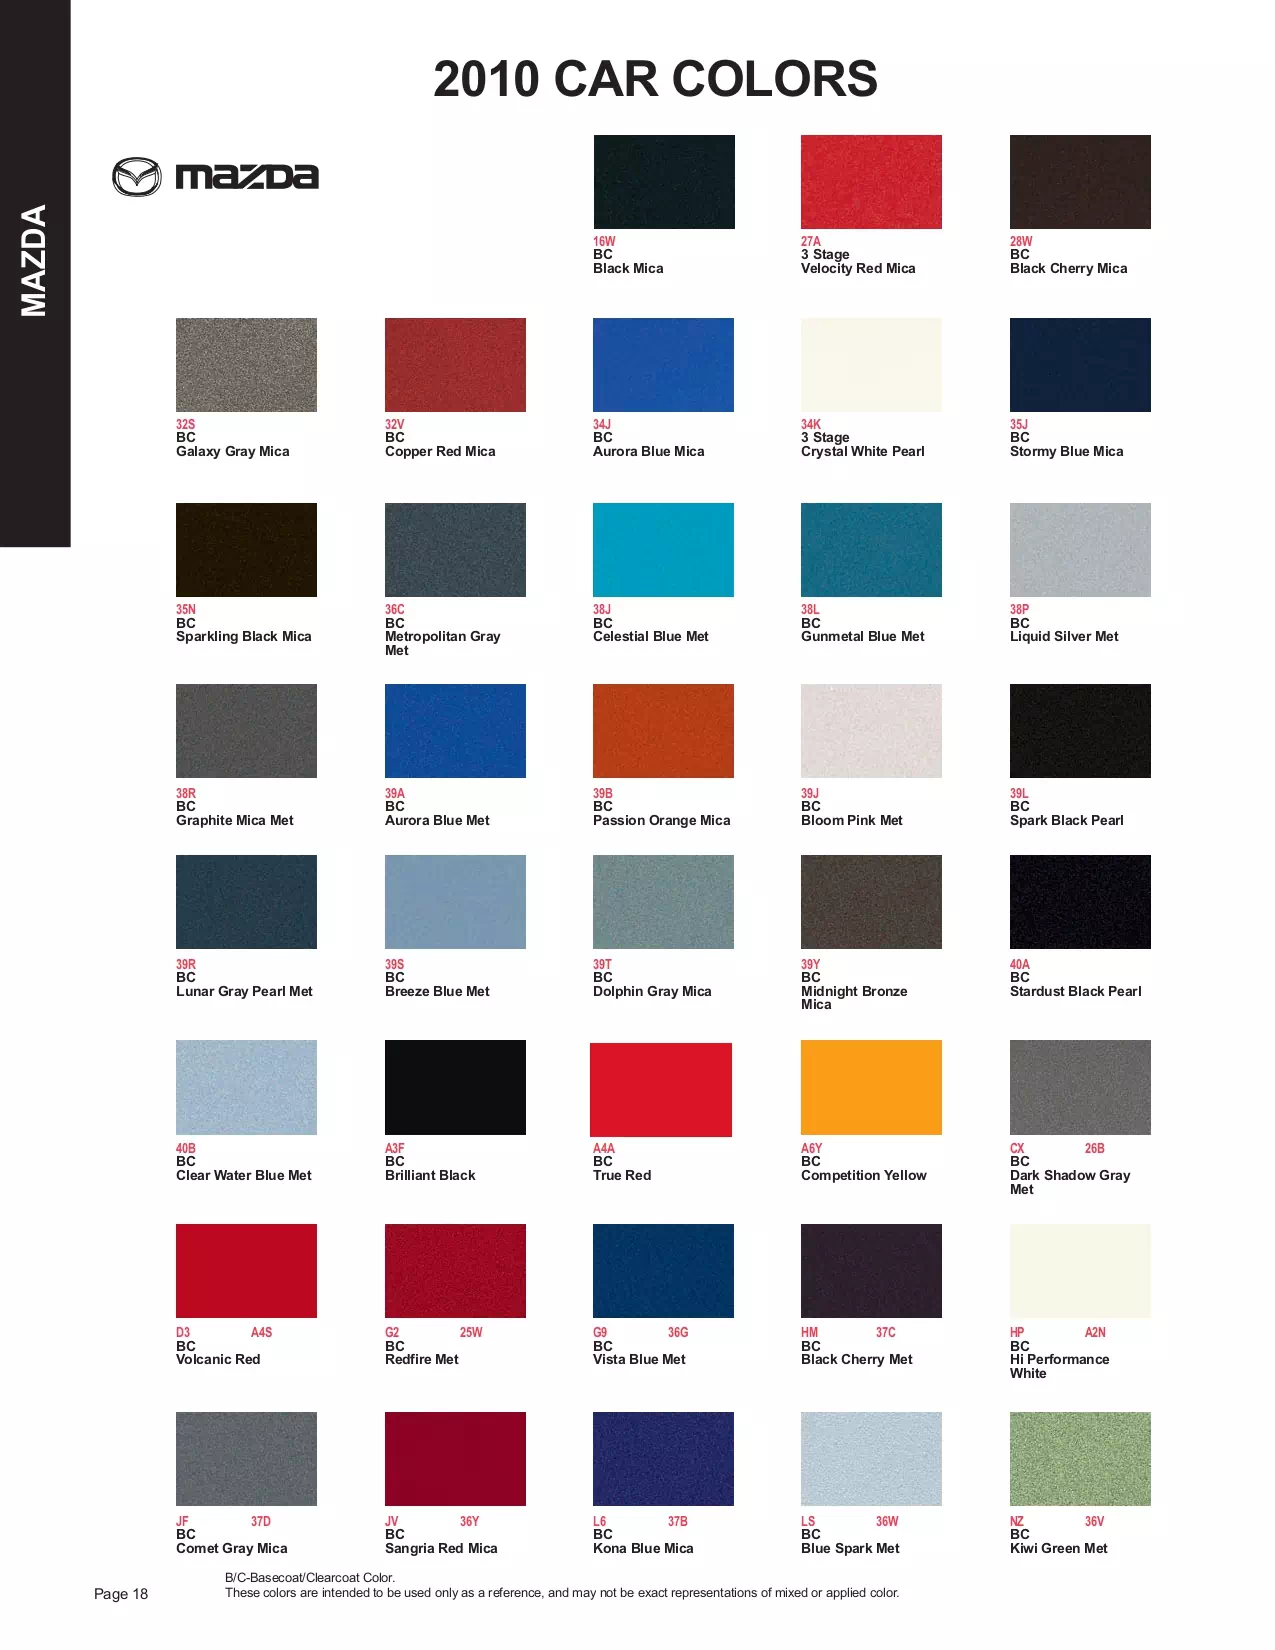 oem paint codes, color swatches and color names for all 2010 Mazda automobiles.